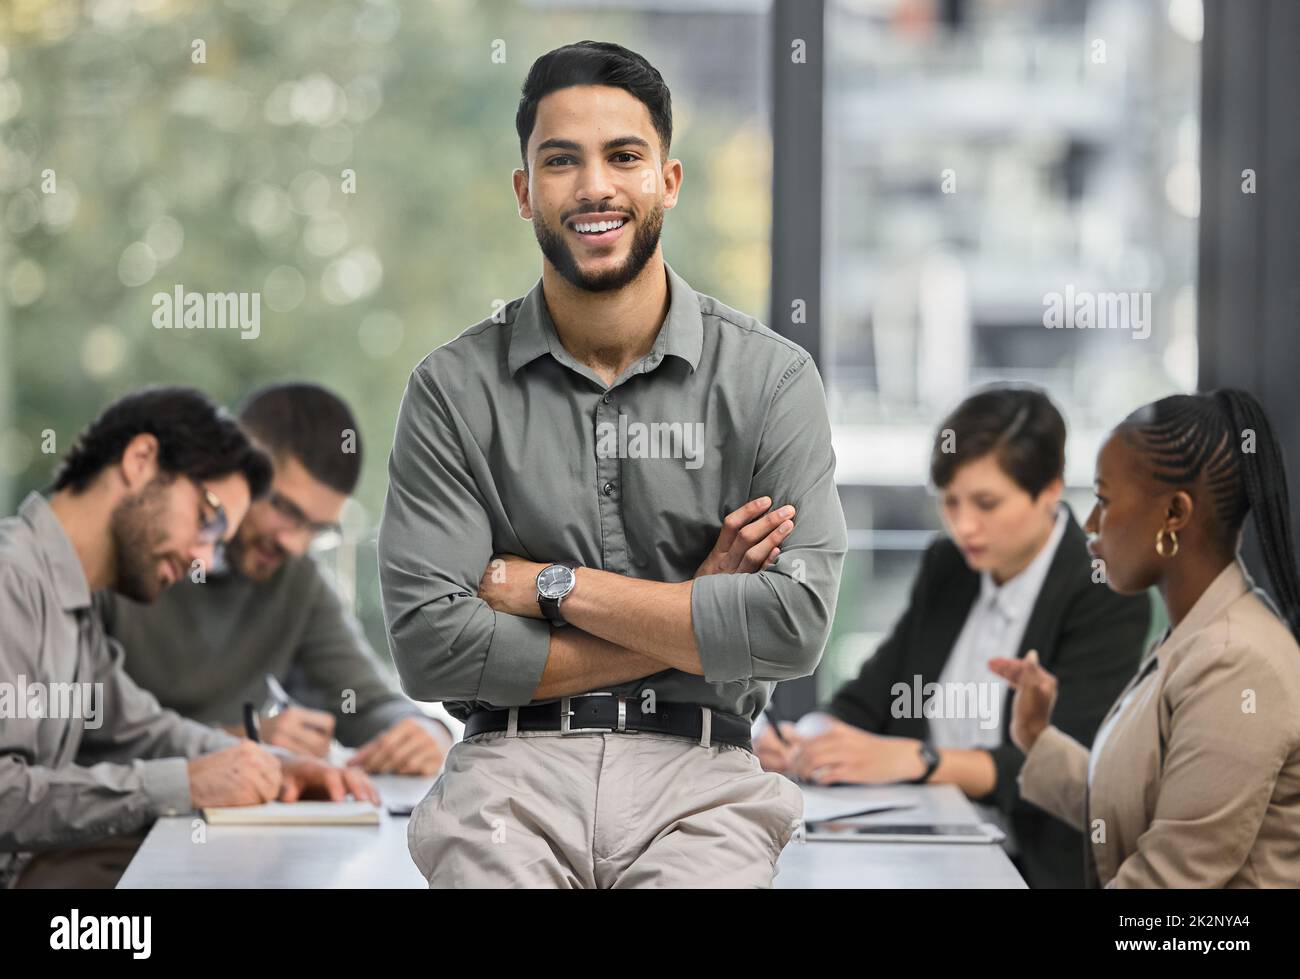 How quickly life can turn around. Portrait of a young businessman at the office sitting in front of his colleagues having a meeting in the background. Stock Photo